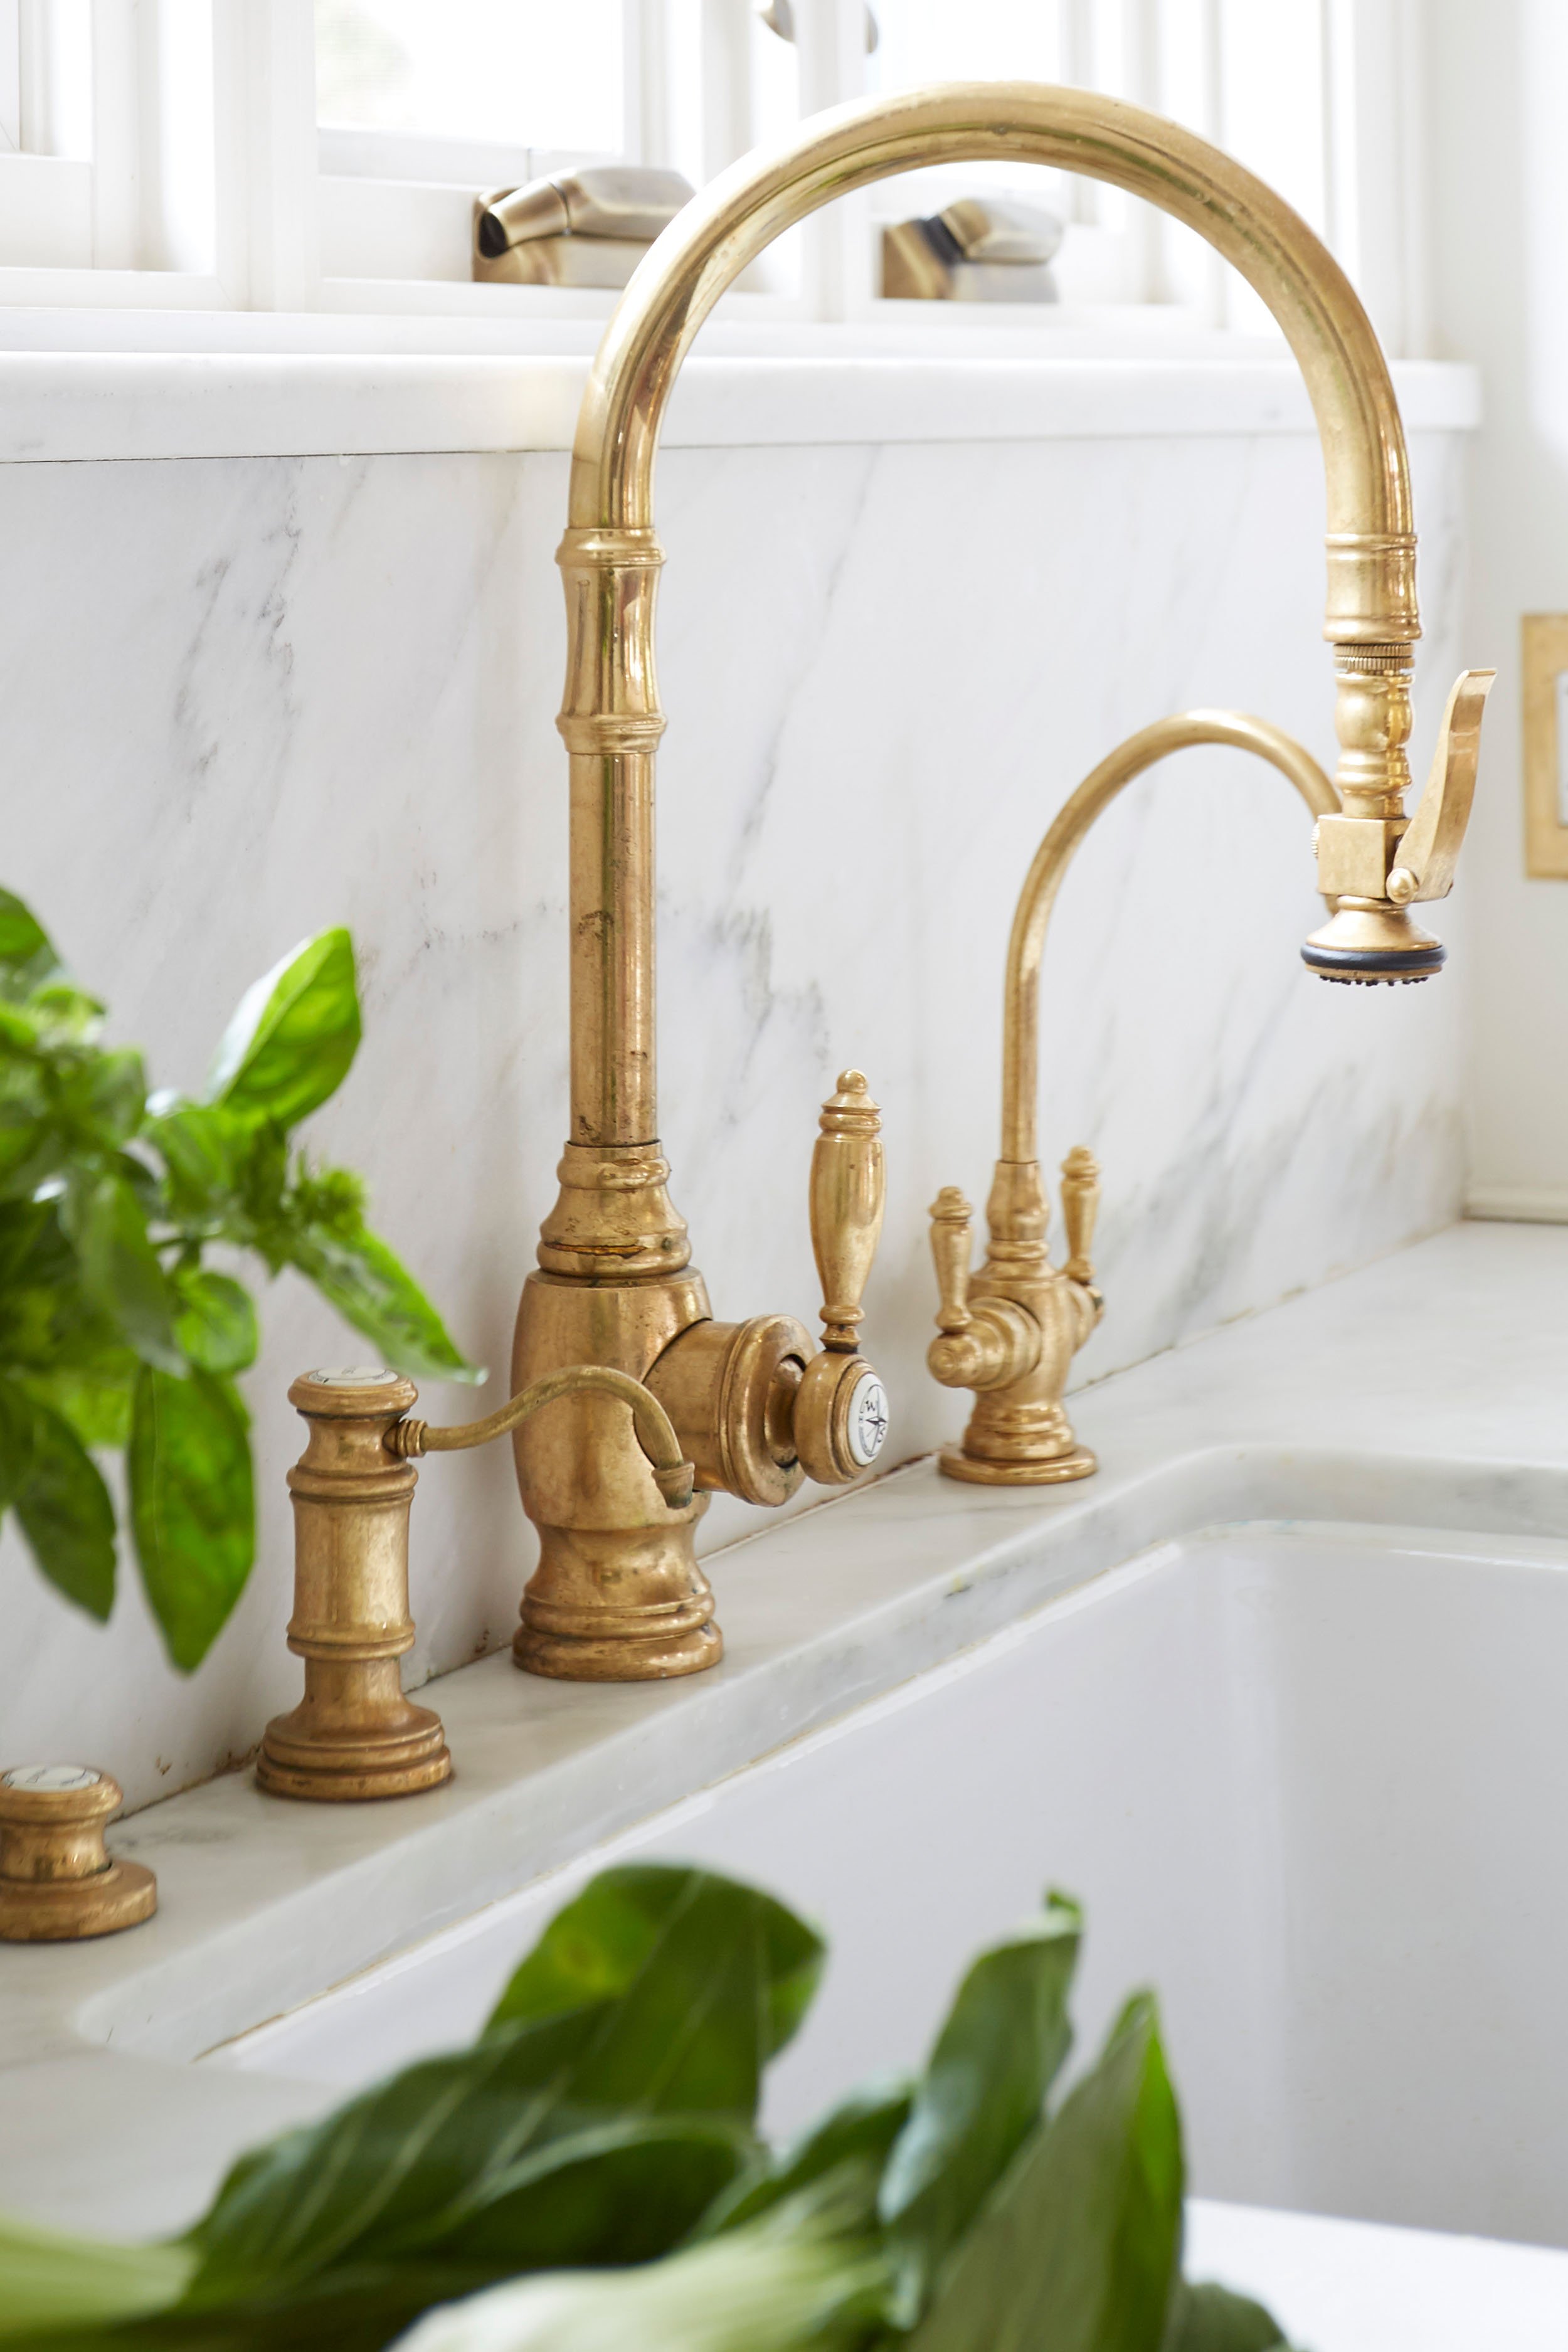 Luxury brass faucet with greenery and marble countertops